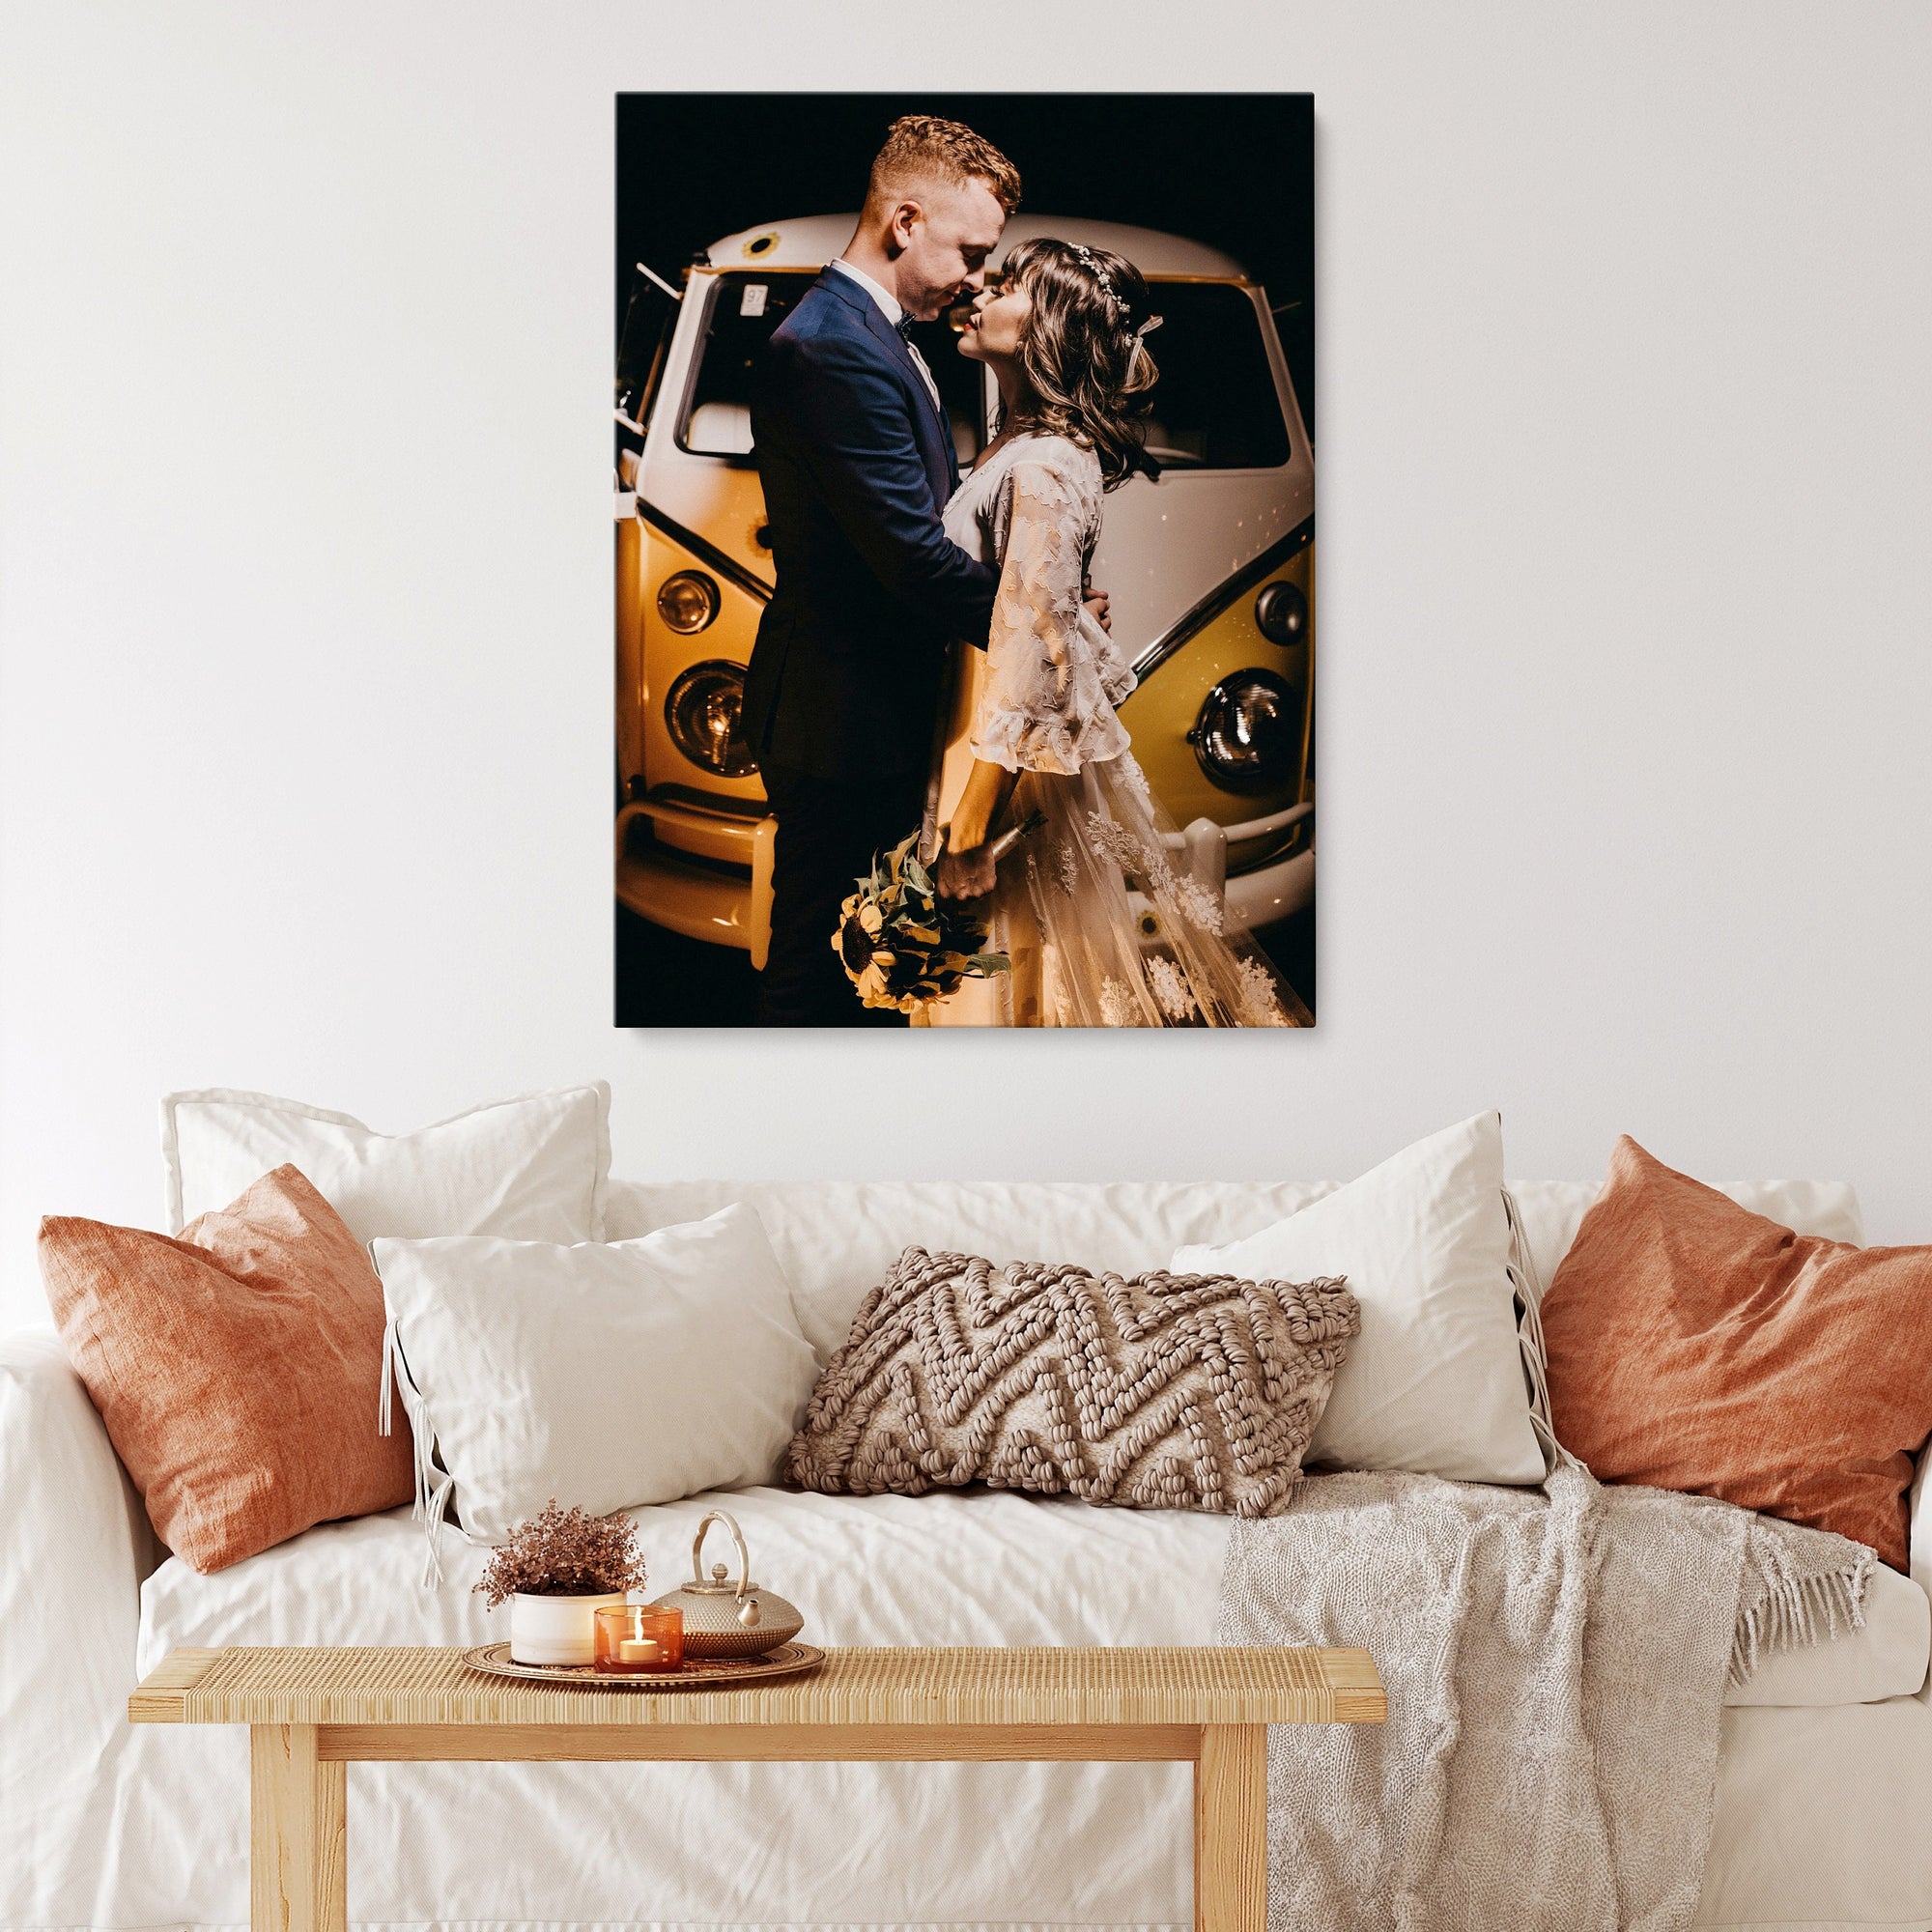 Order Your Custom Canvas Prints Online for Your Photos or Fine Art